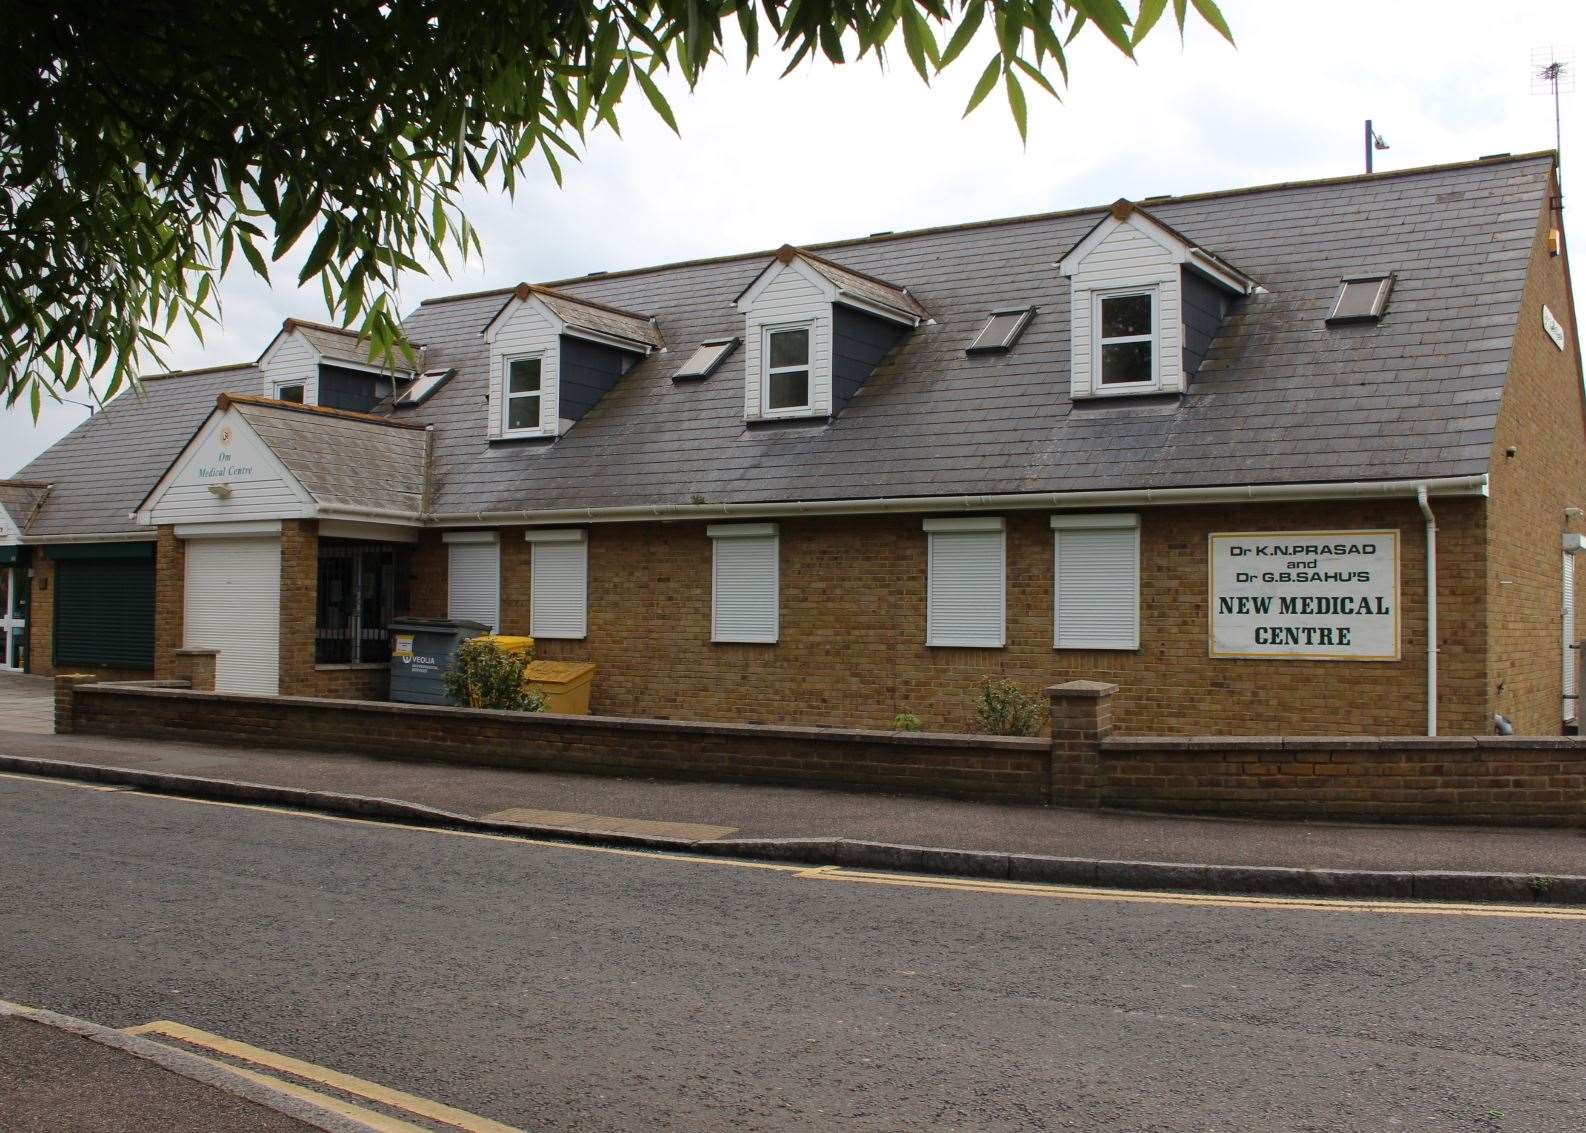 OM Medical Centre in Wood Street, Sheerness has had its CQC rating upgraded